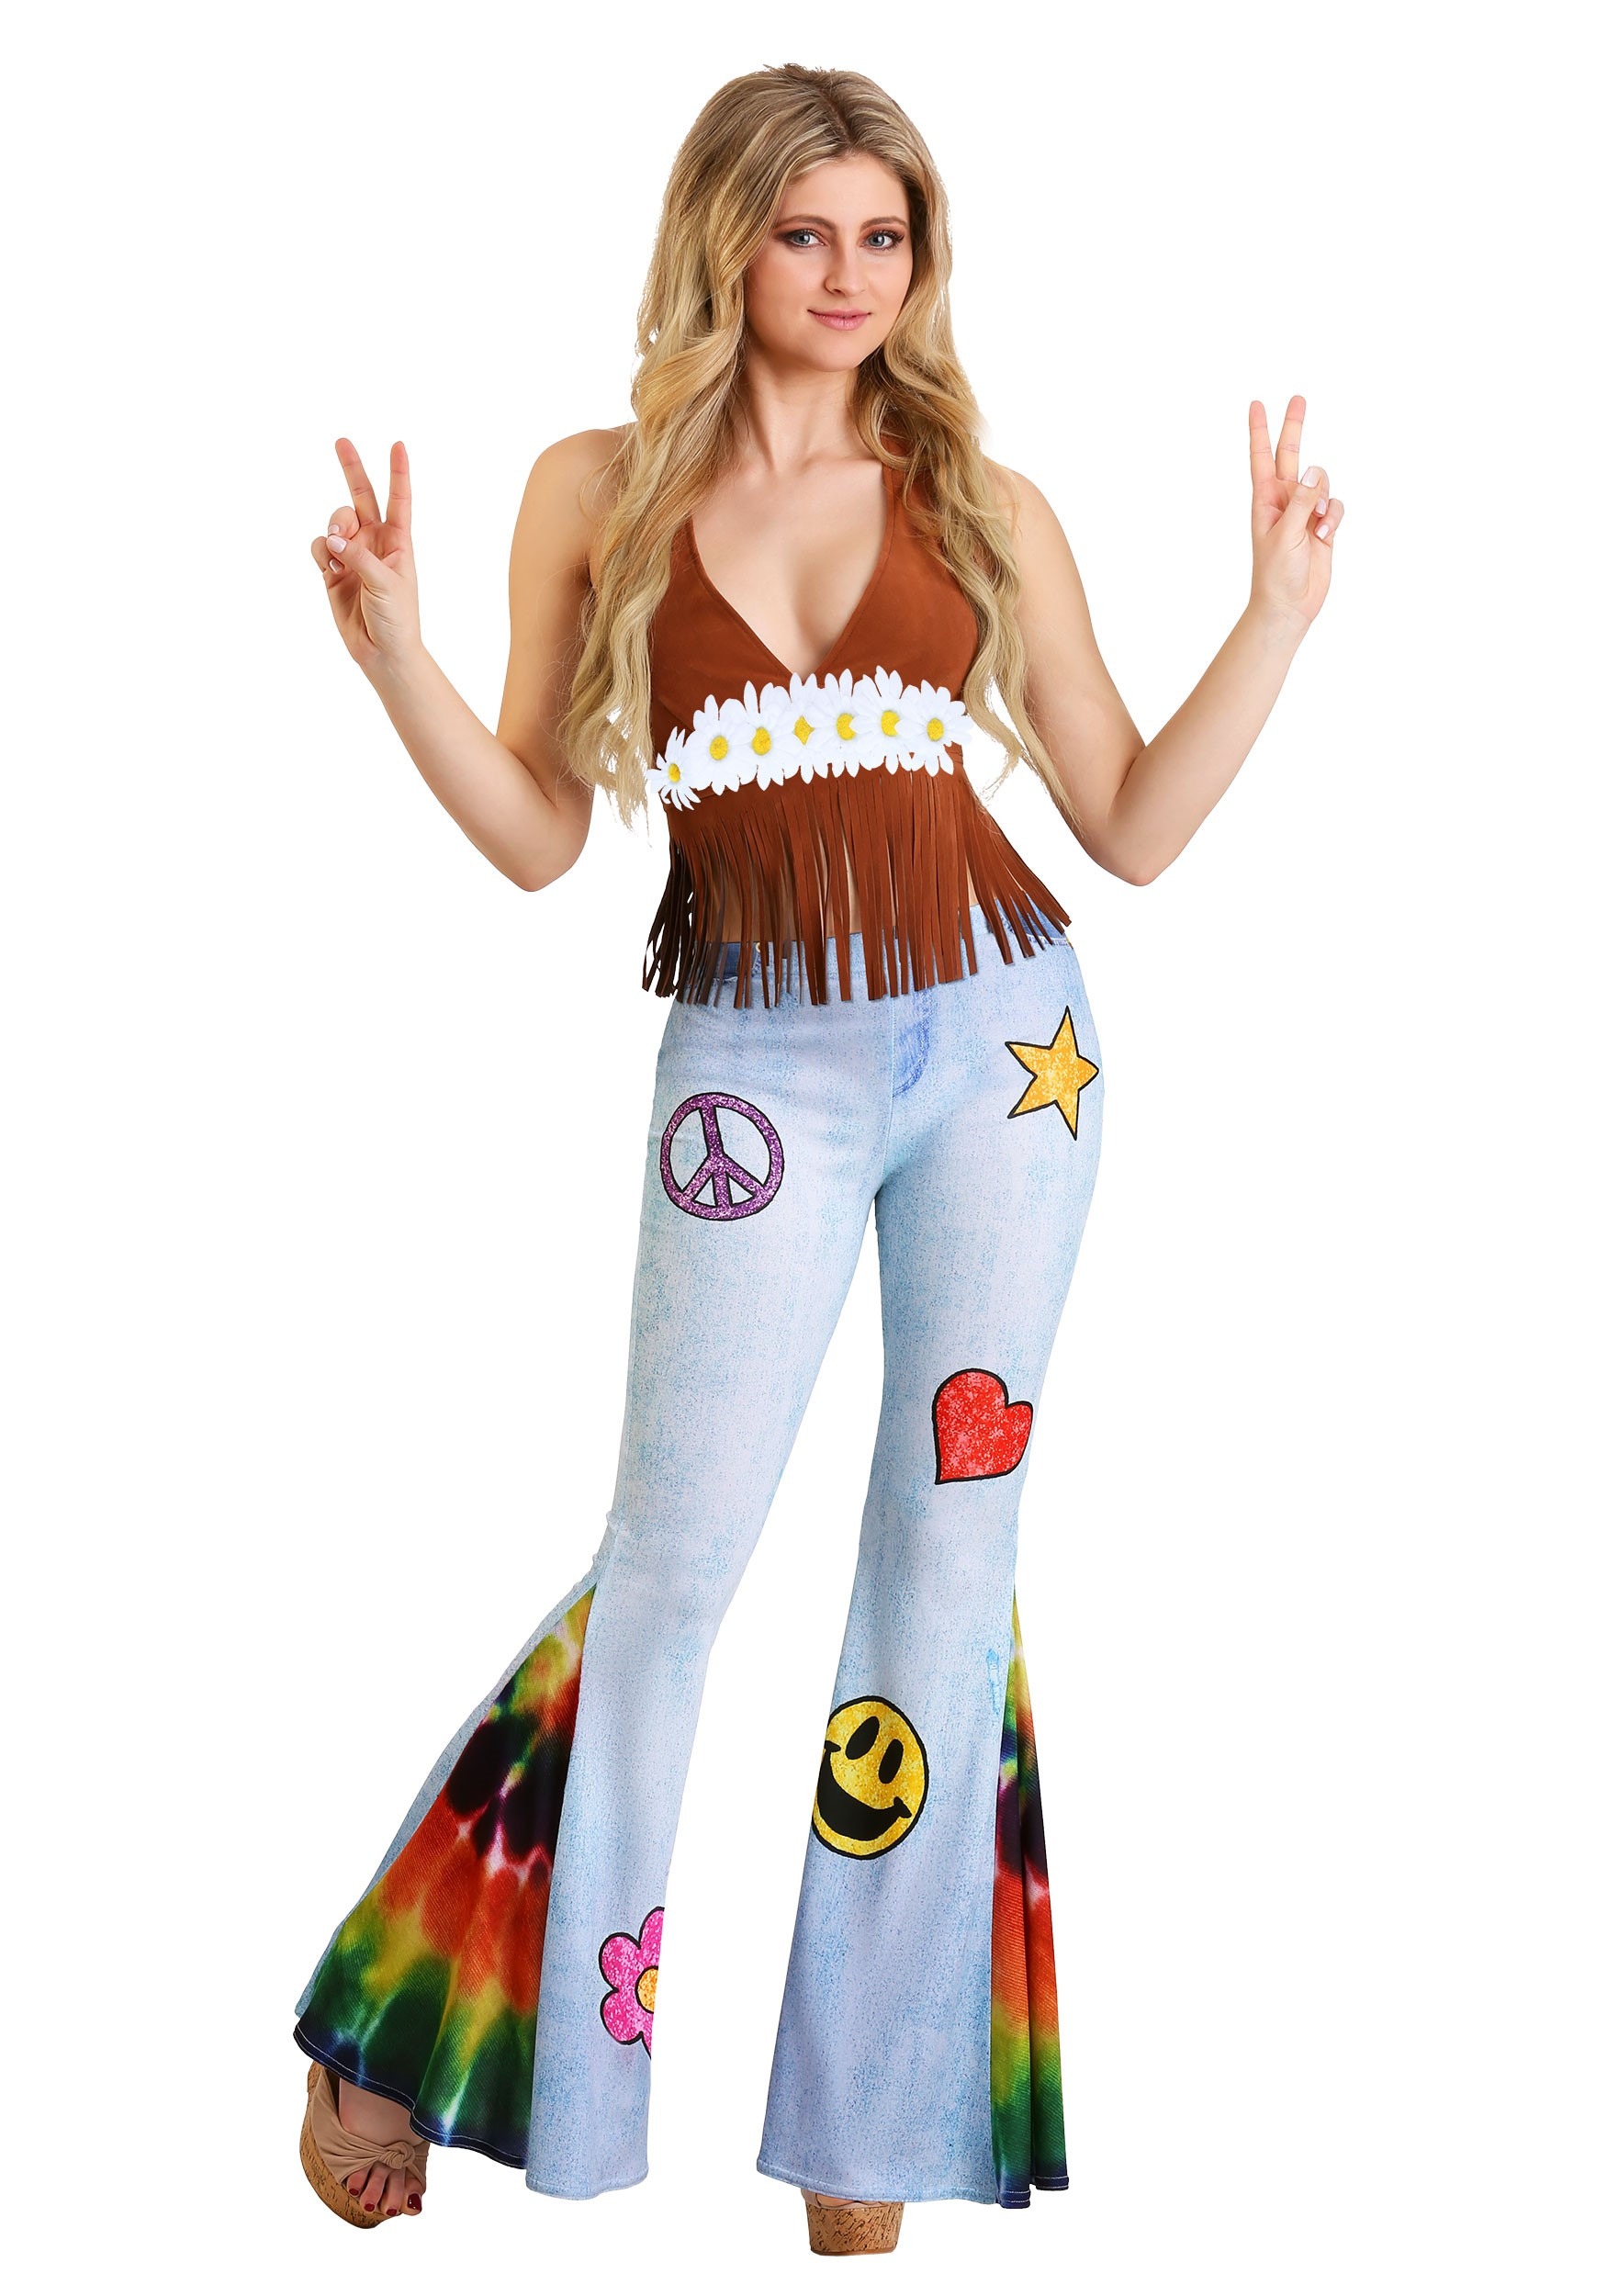 1970s Outfit Inspiration | 70s Costume Ideas Patchwork Hippie Womens Costume $34.99 AT vintagedancer.com